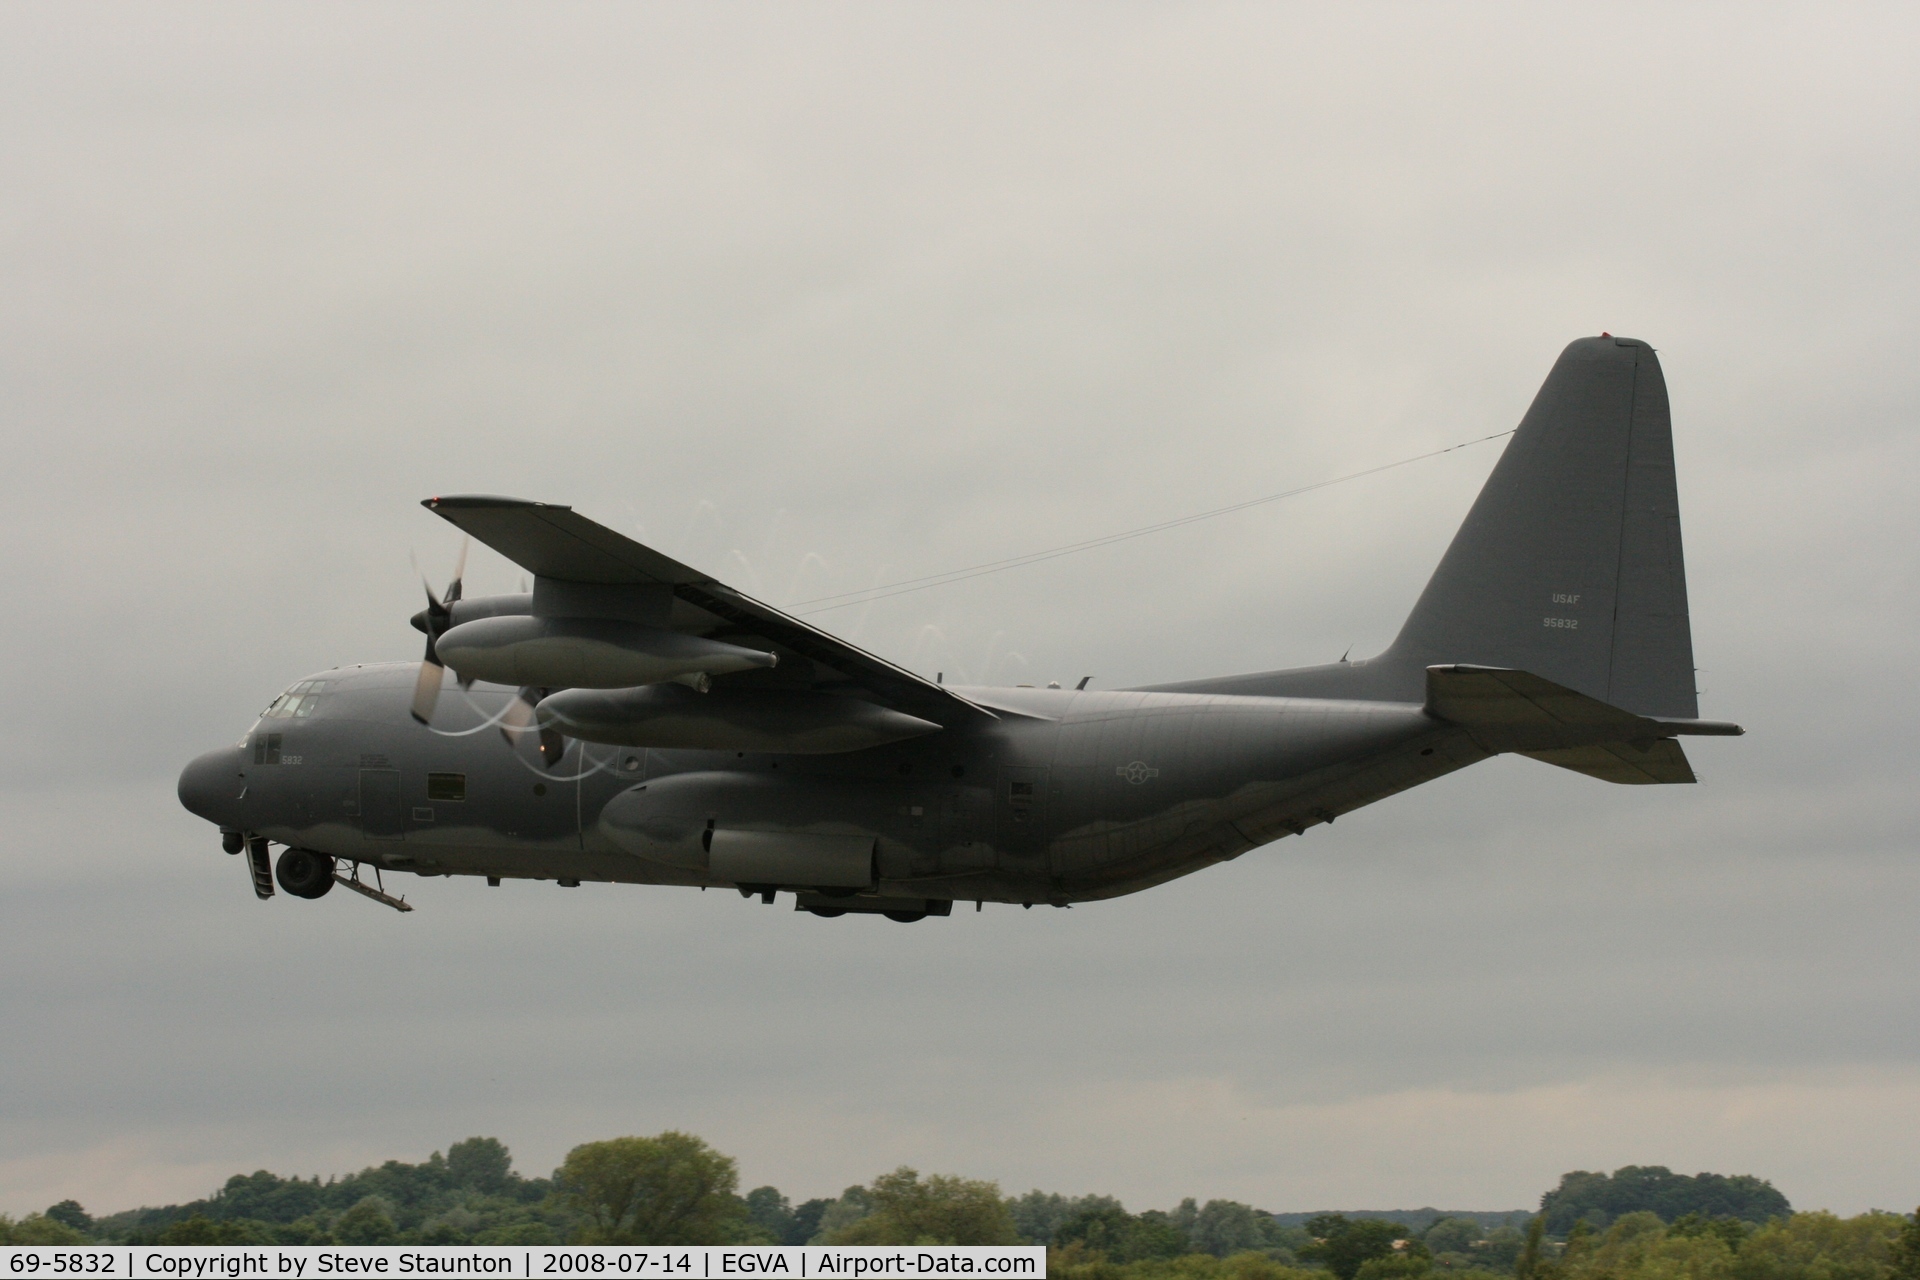 69-5832, 1970 Lockheed MC-130P Combat Shadow C/N 382-4381, Taken at the Royal International Air Tattoo 2008 during arrivals and departures (show days cancelled due to bad weather)